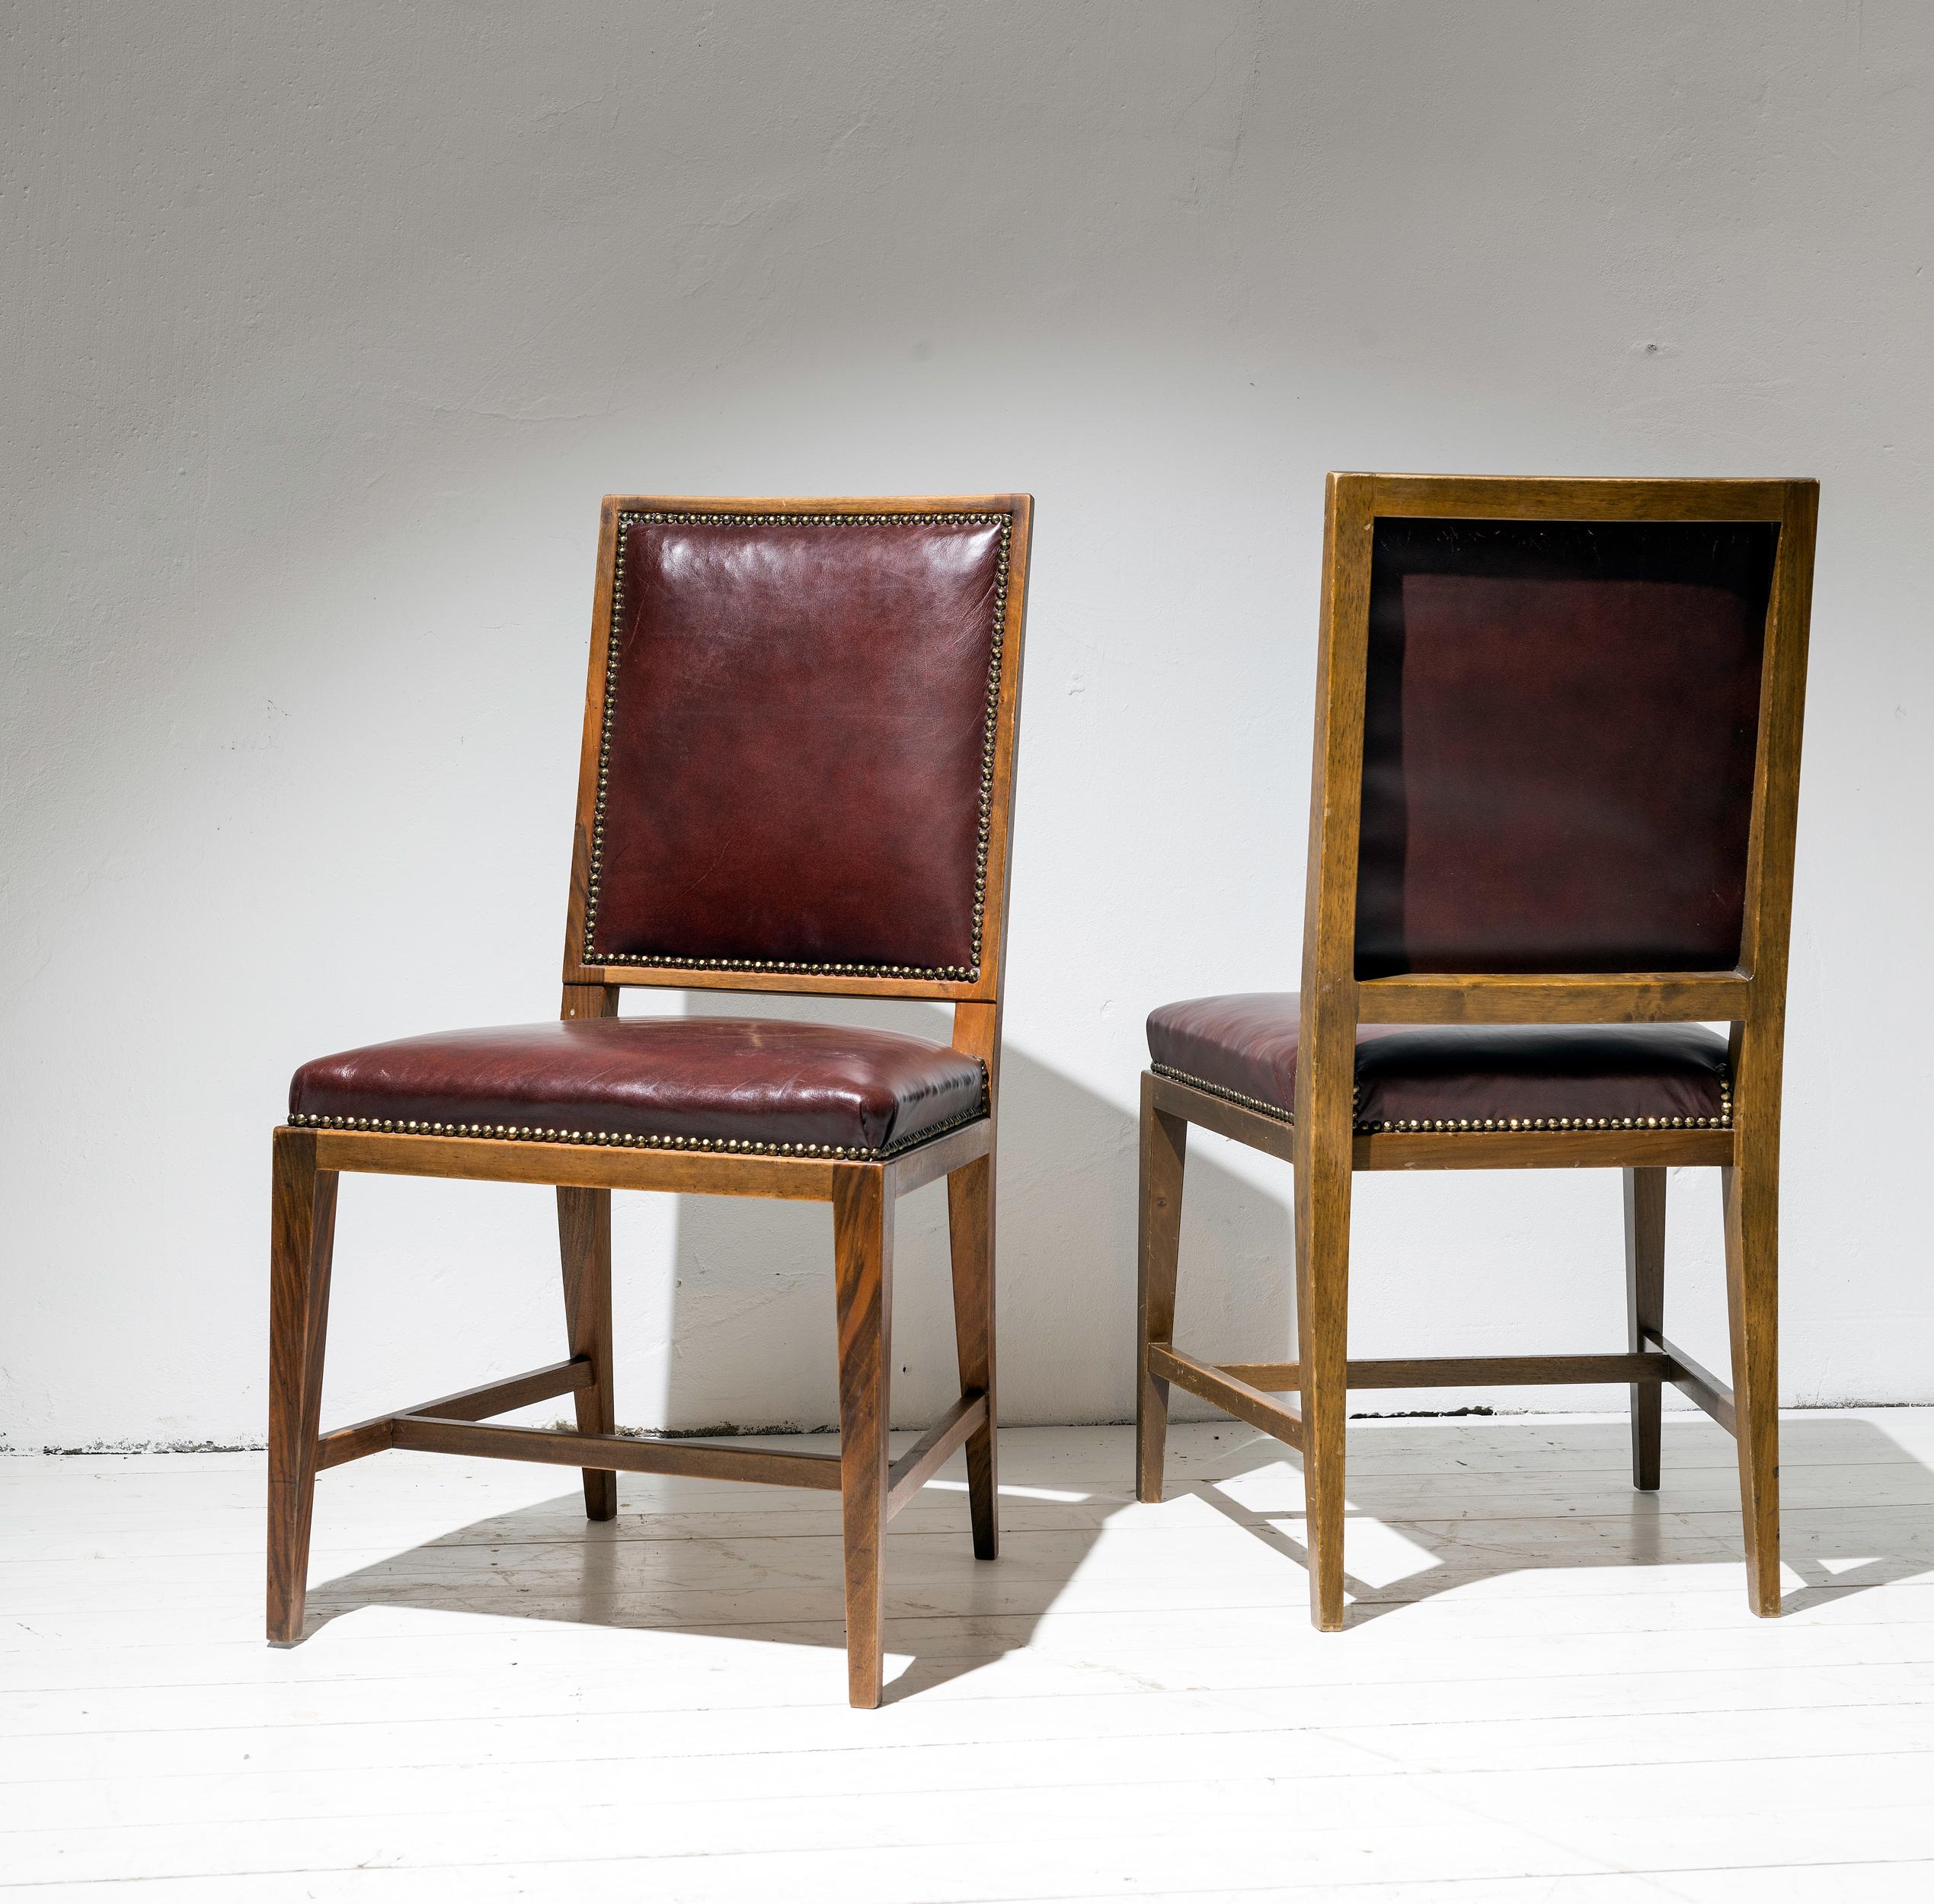 Veneer Twelve Elegant Mahogany and Leather Dining Chairs Inspired by Jean-Michel Frank